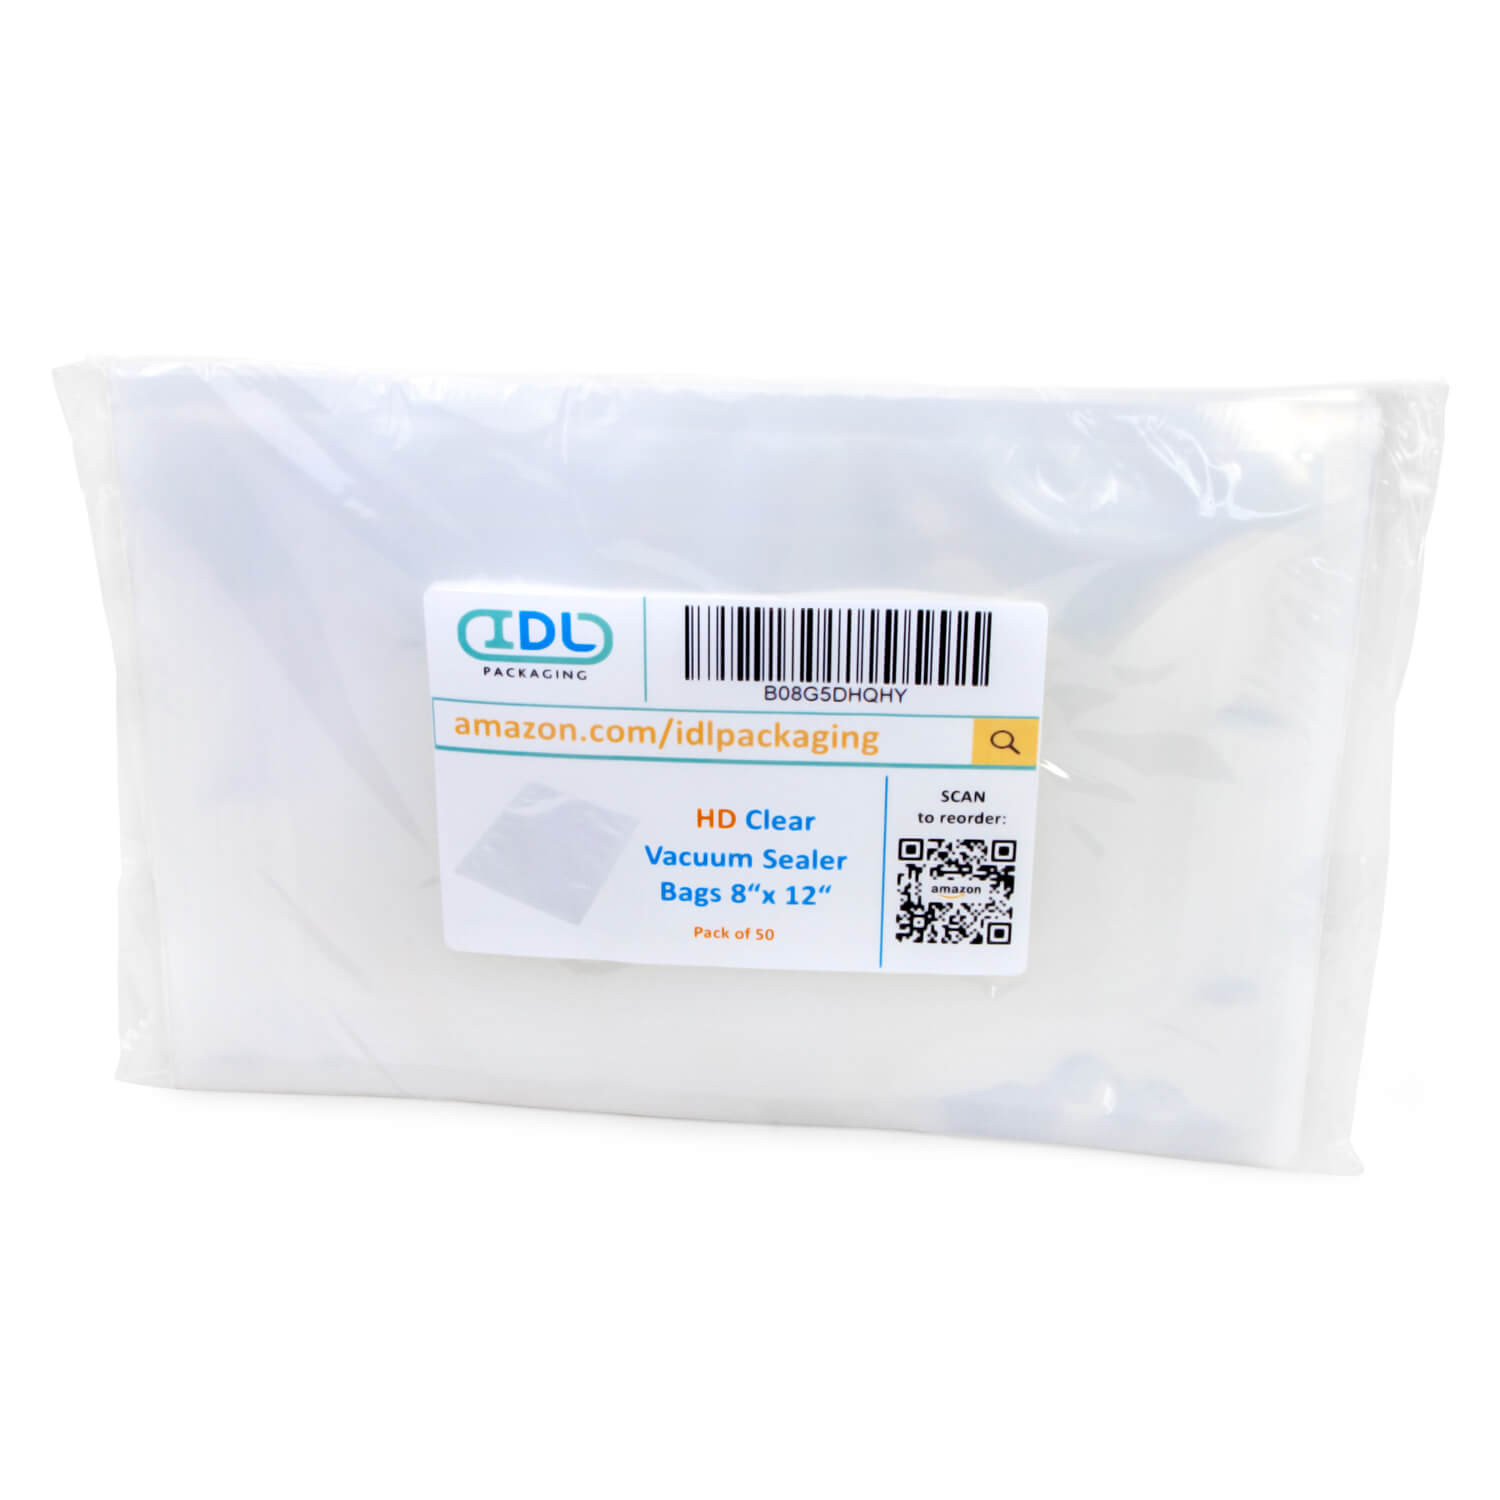 https://idlpack.com/image/cache/catalog/Products/Vacuum-Bags/8-12/IDL-Packaging-8-12-clear-vacuum-sealer-bags-pack-of-50-1500x1500.jpg